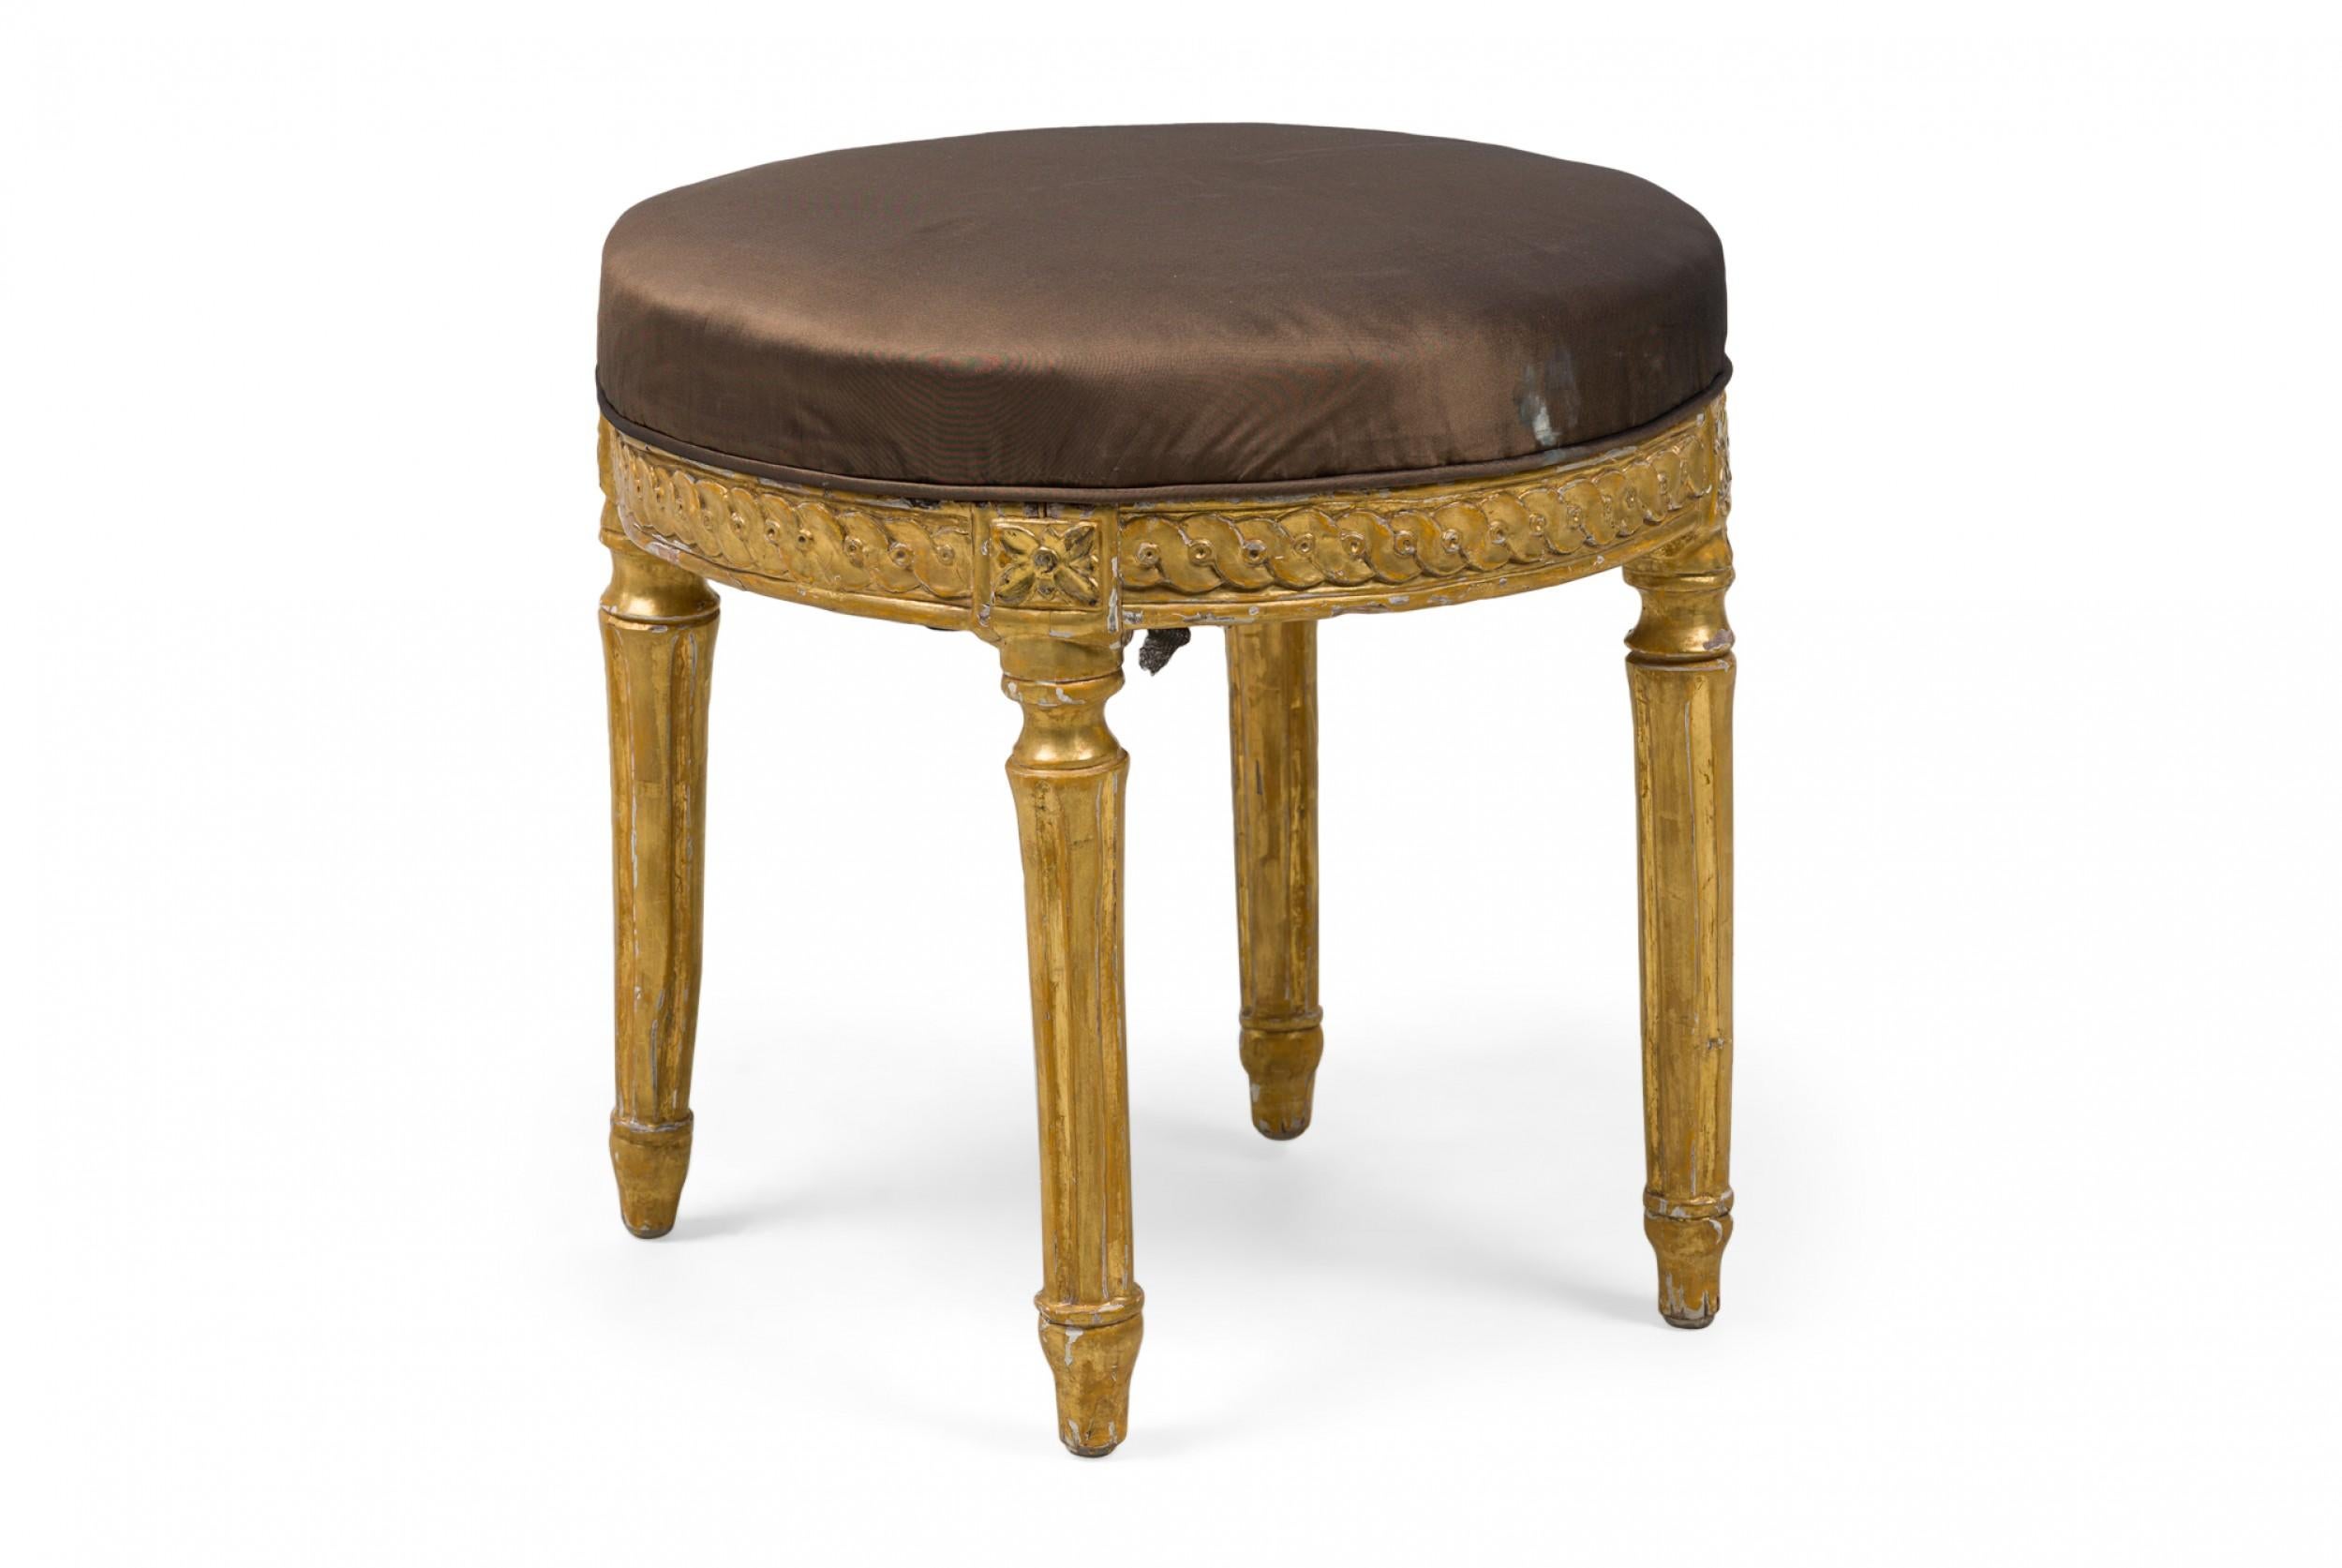 Carved Pair of Italian Neo-Classic Giltwood Upholstered Taborets / Benches / Stools For Sale